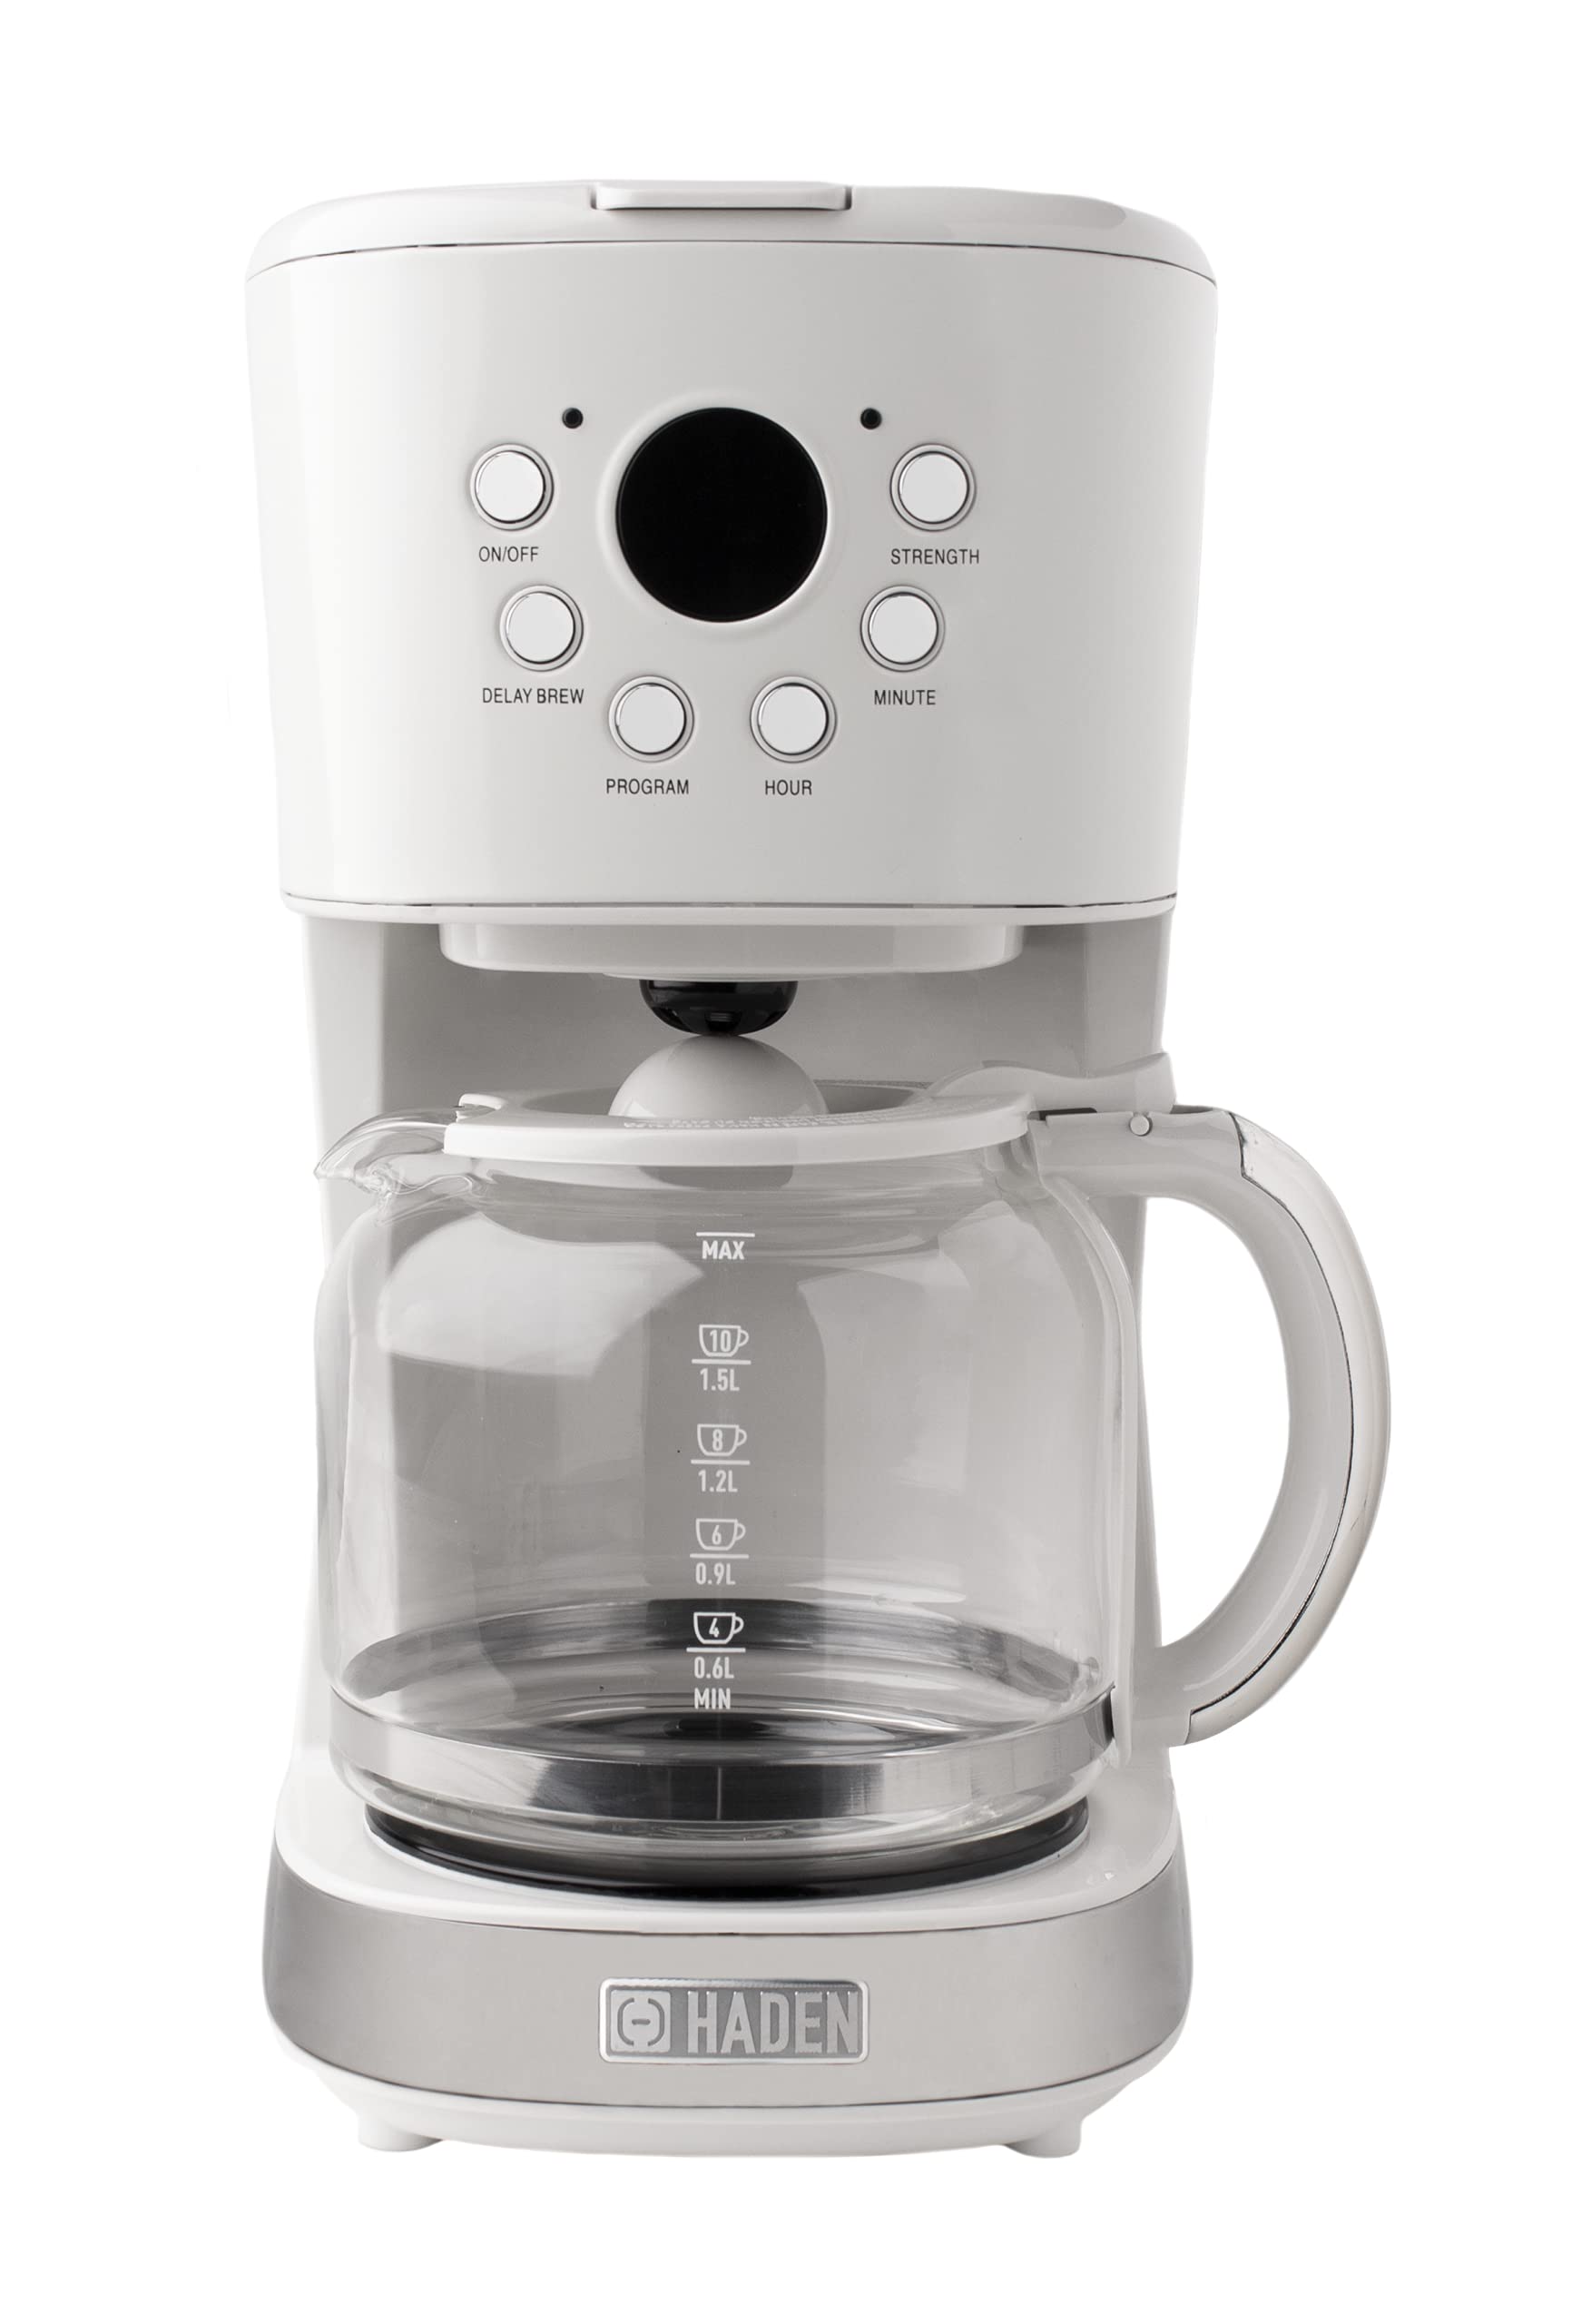 Haden 12-Cup Programmable Coffee Maker with Strength Control and Timer - Ivory